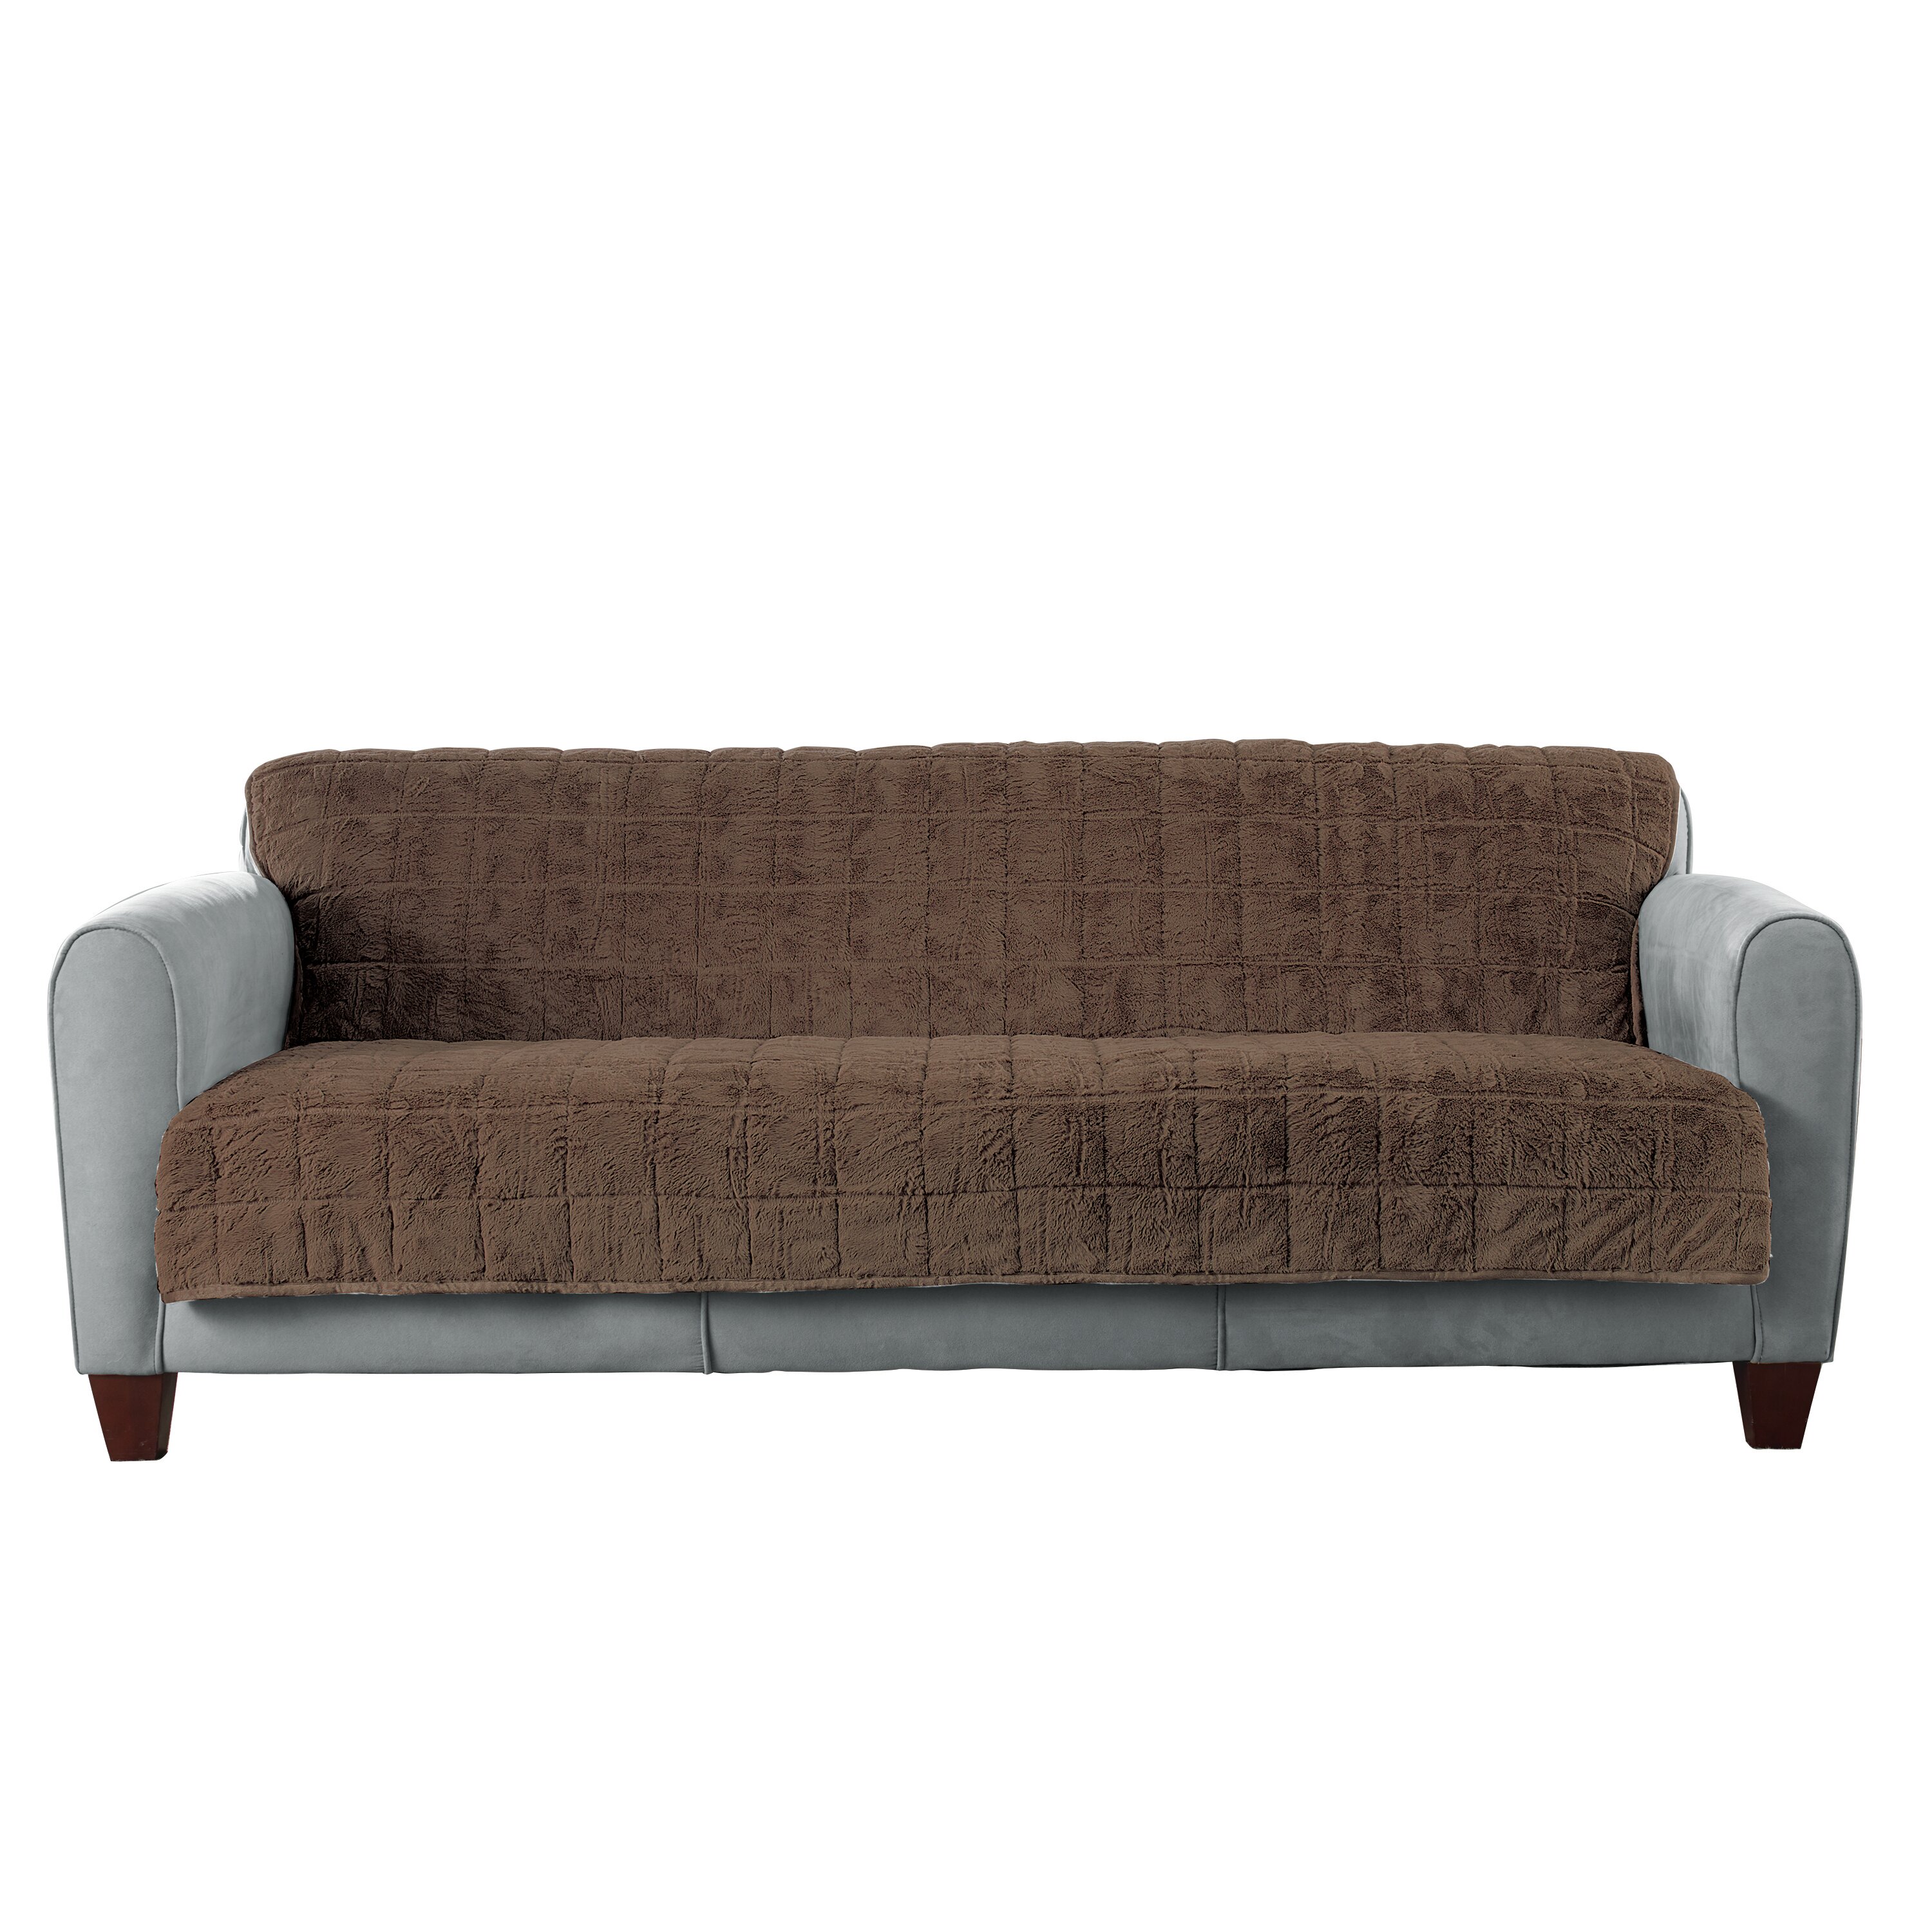 Sure Fit Faux Fur Quilted Sofa Slipcover Wayfair